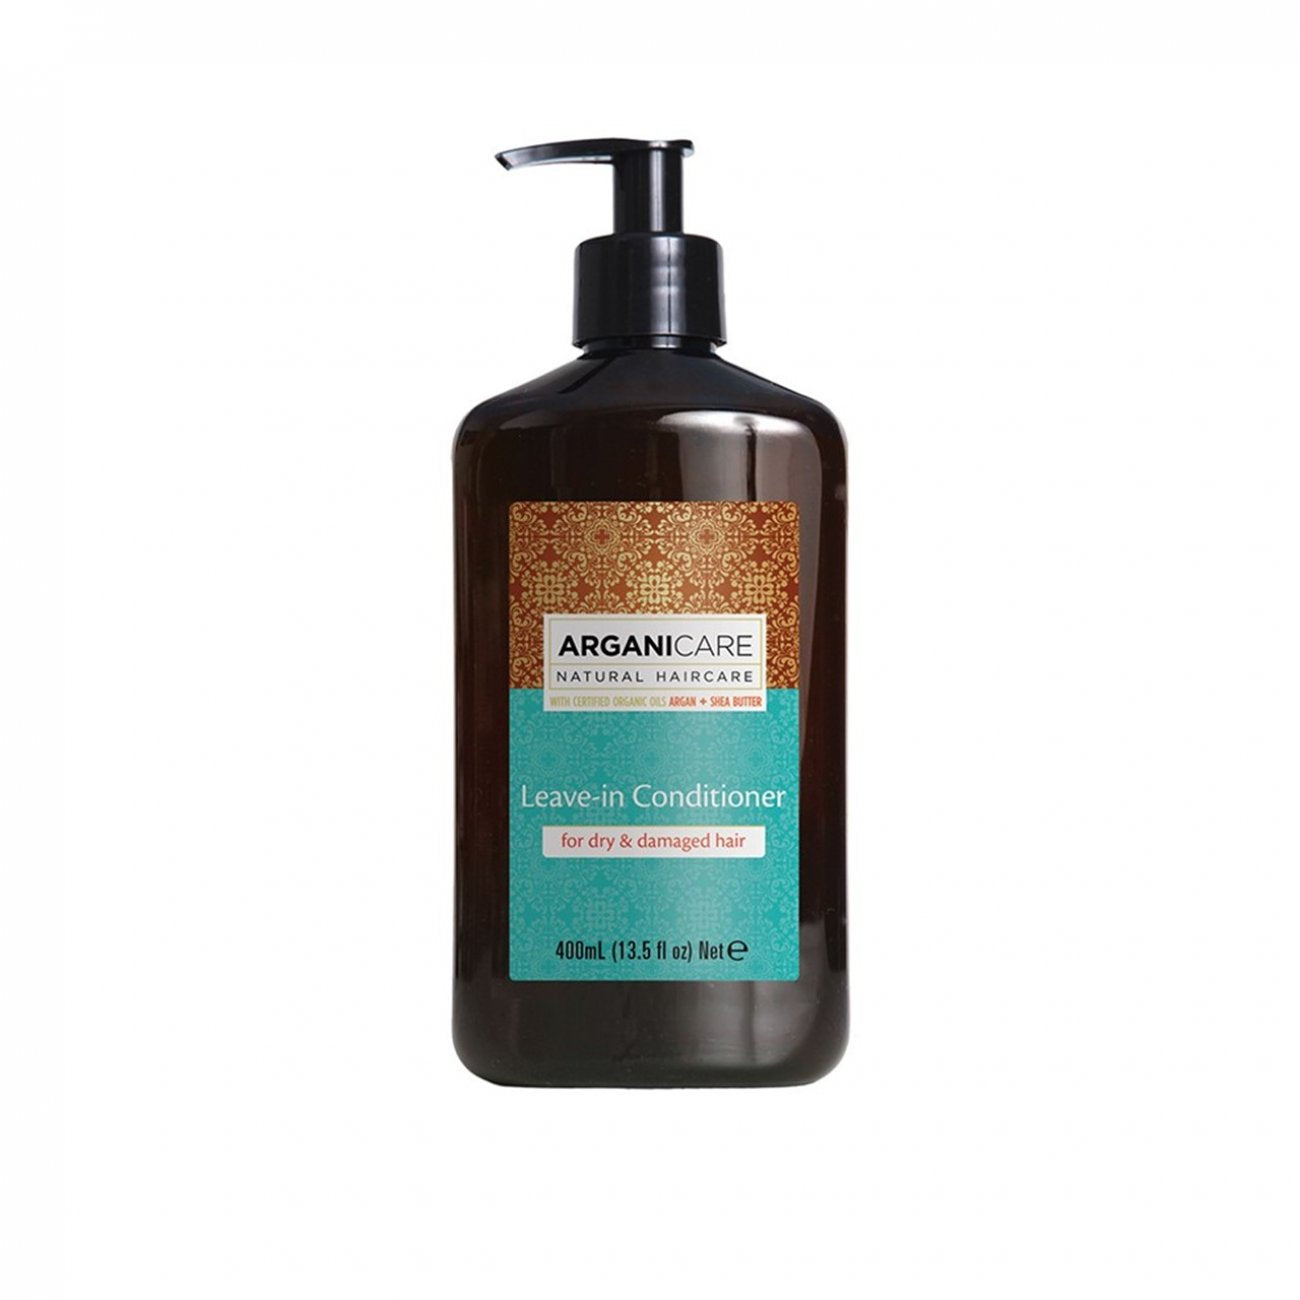 Arganicare Leave-in Conditioner for Dry & Damaged Hair 400ml